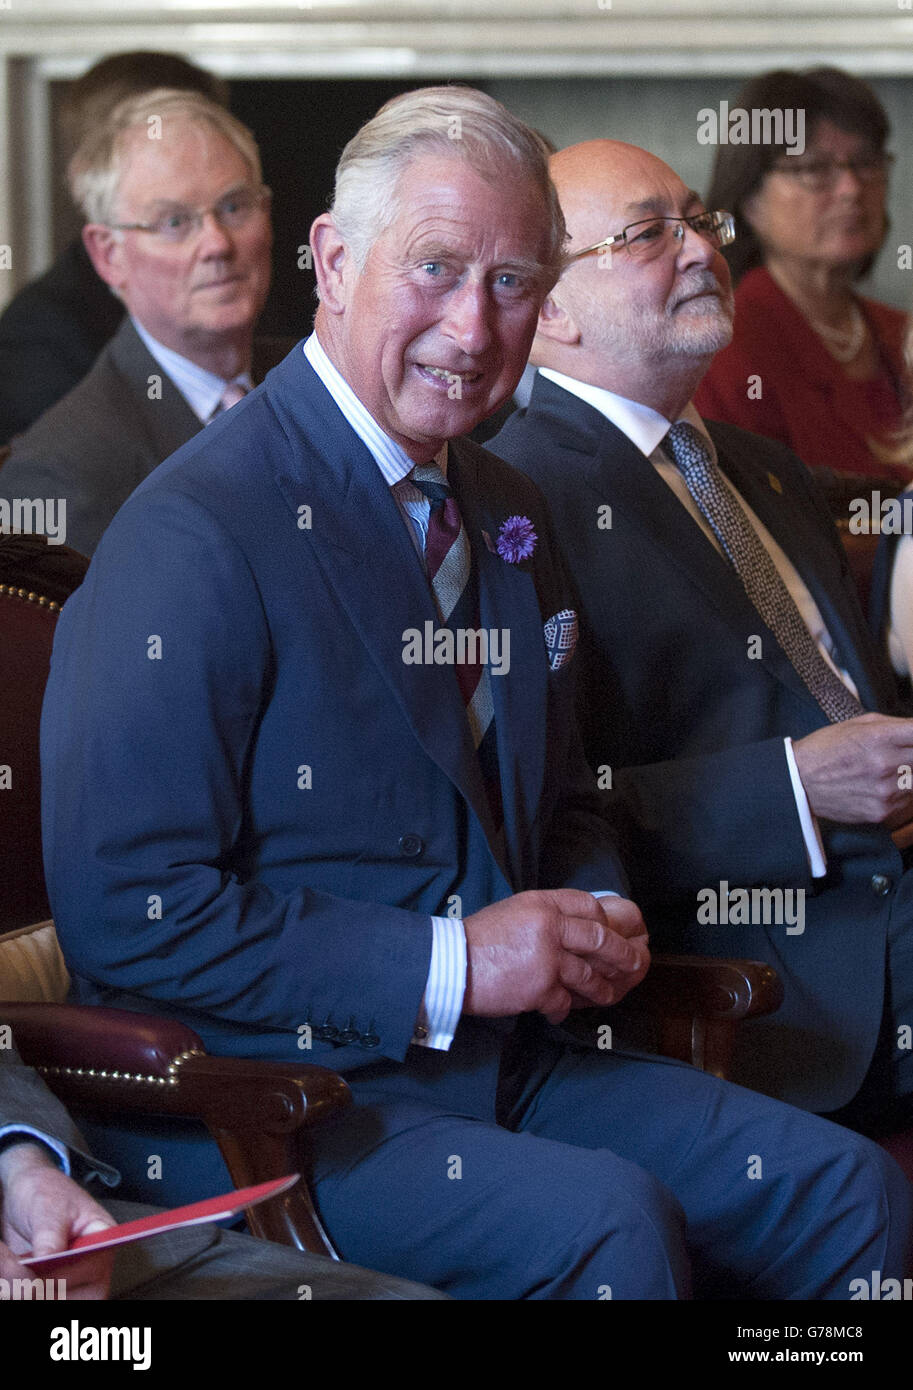 The Prince of Wales meets musicians as he attends a recital to celebrate the Scottish Chamber Orchestra's 40th Anniversary at the Palace of Holyroodhouse, Edinburgh, during his annual visit to Scotland. Stock Photo